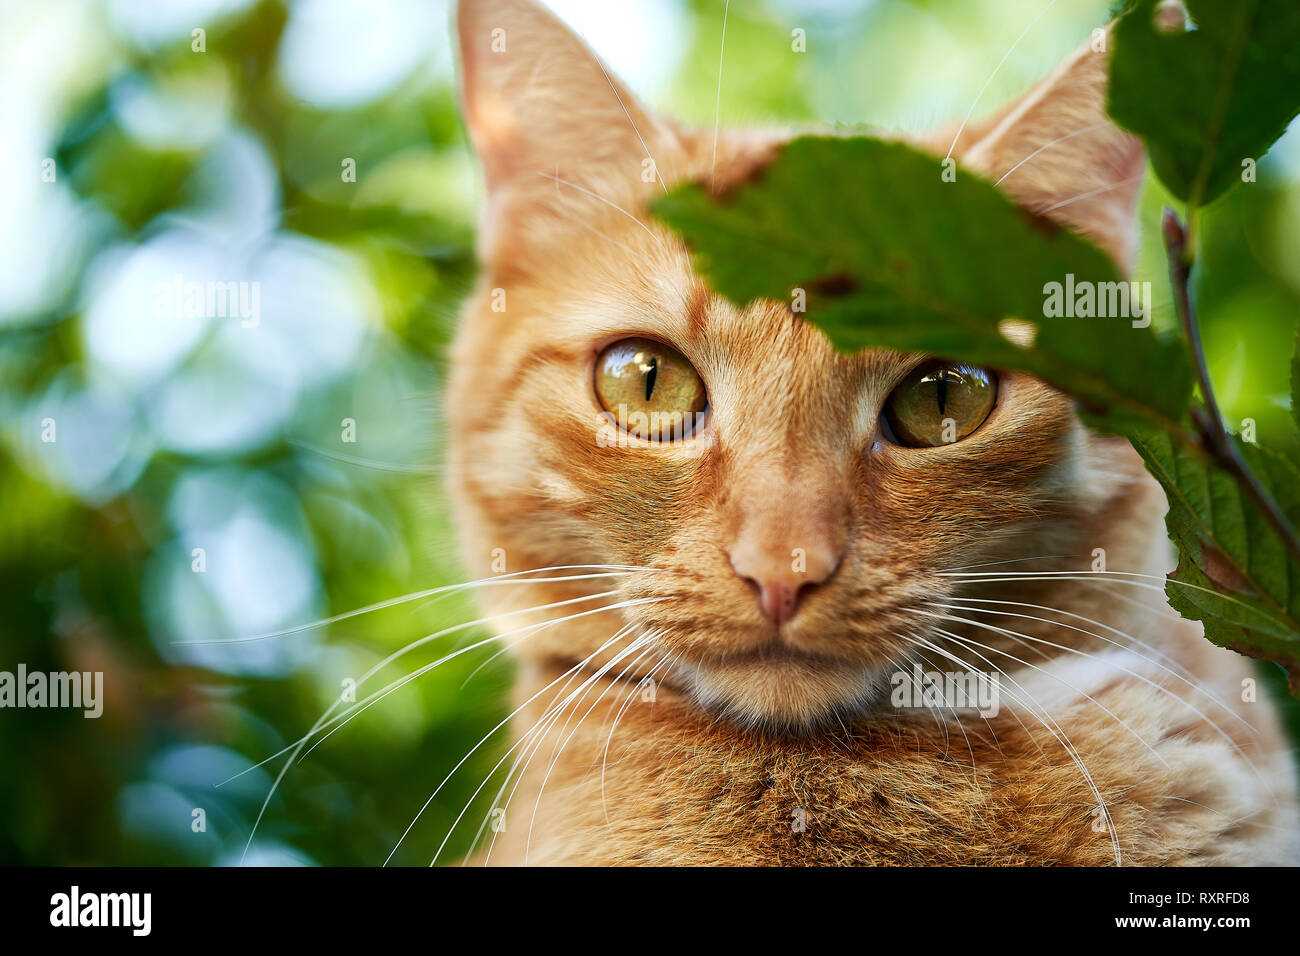 A domestic cat in the garden Stock Photo